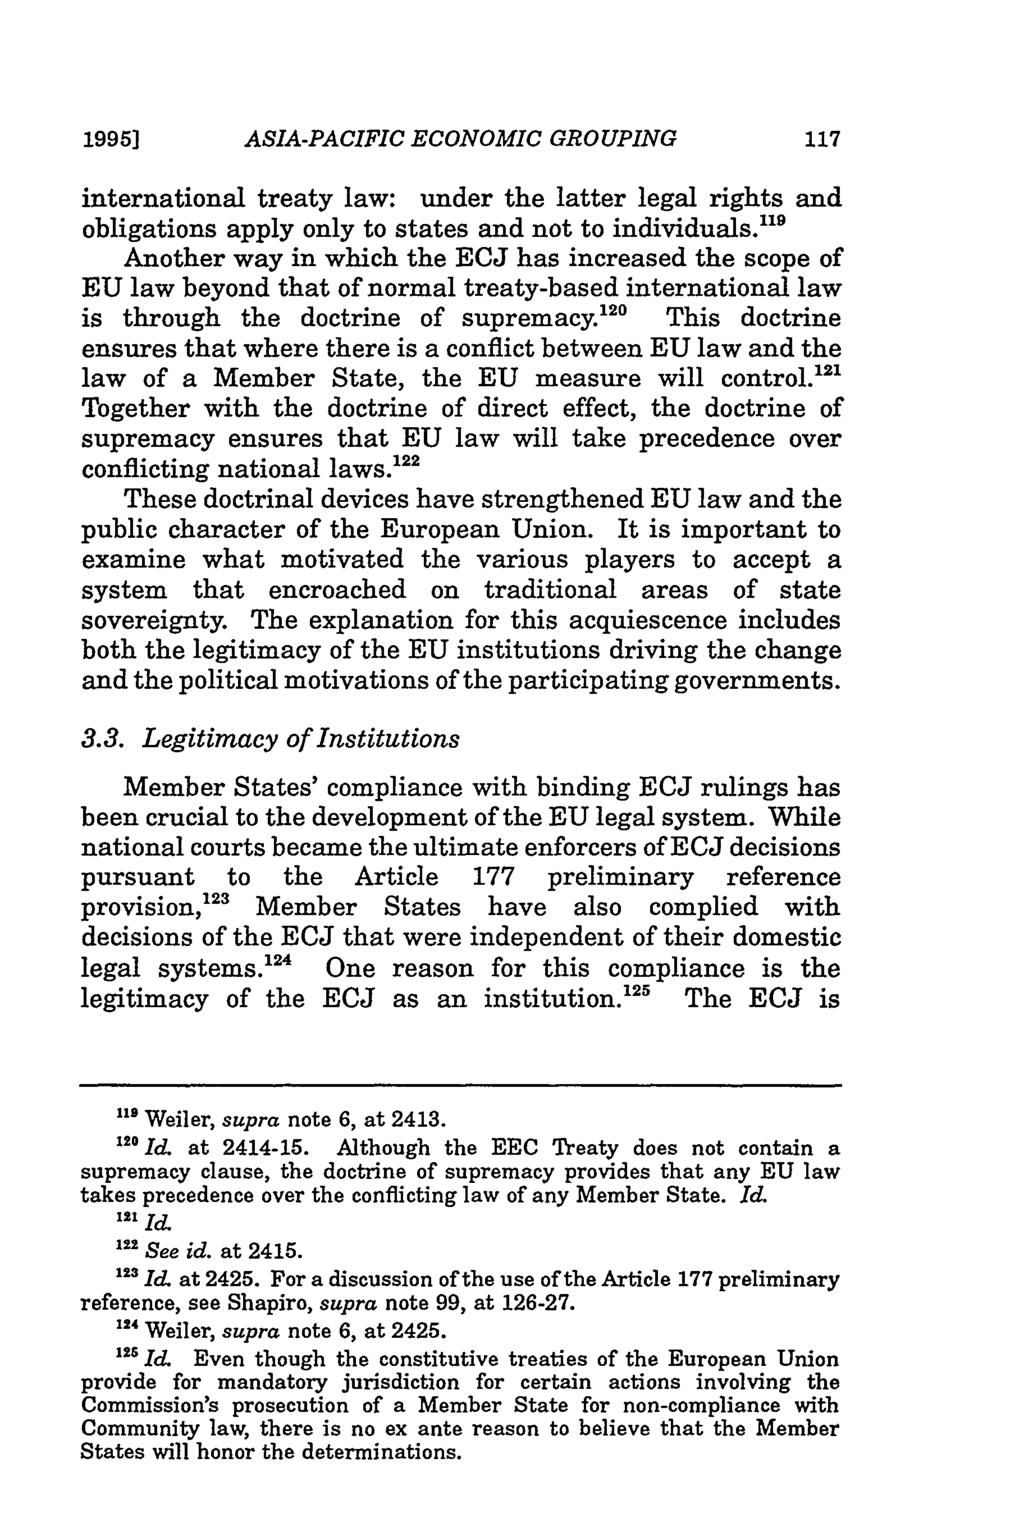 1995] ASIA-PACIFIC ECONOMIC GROUPING international treaty law: under the latter legal rights and obligations apply only to states and not to individuals.